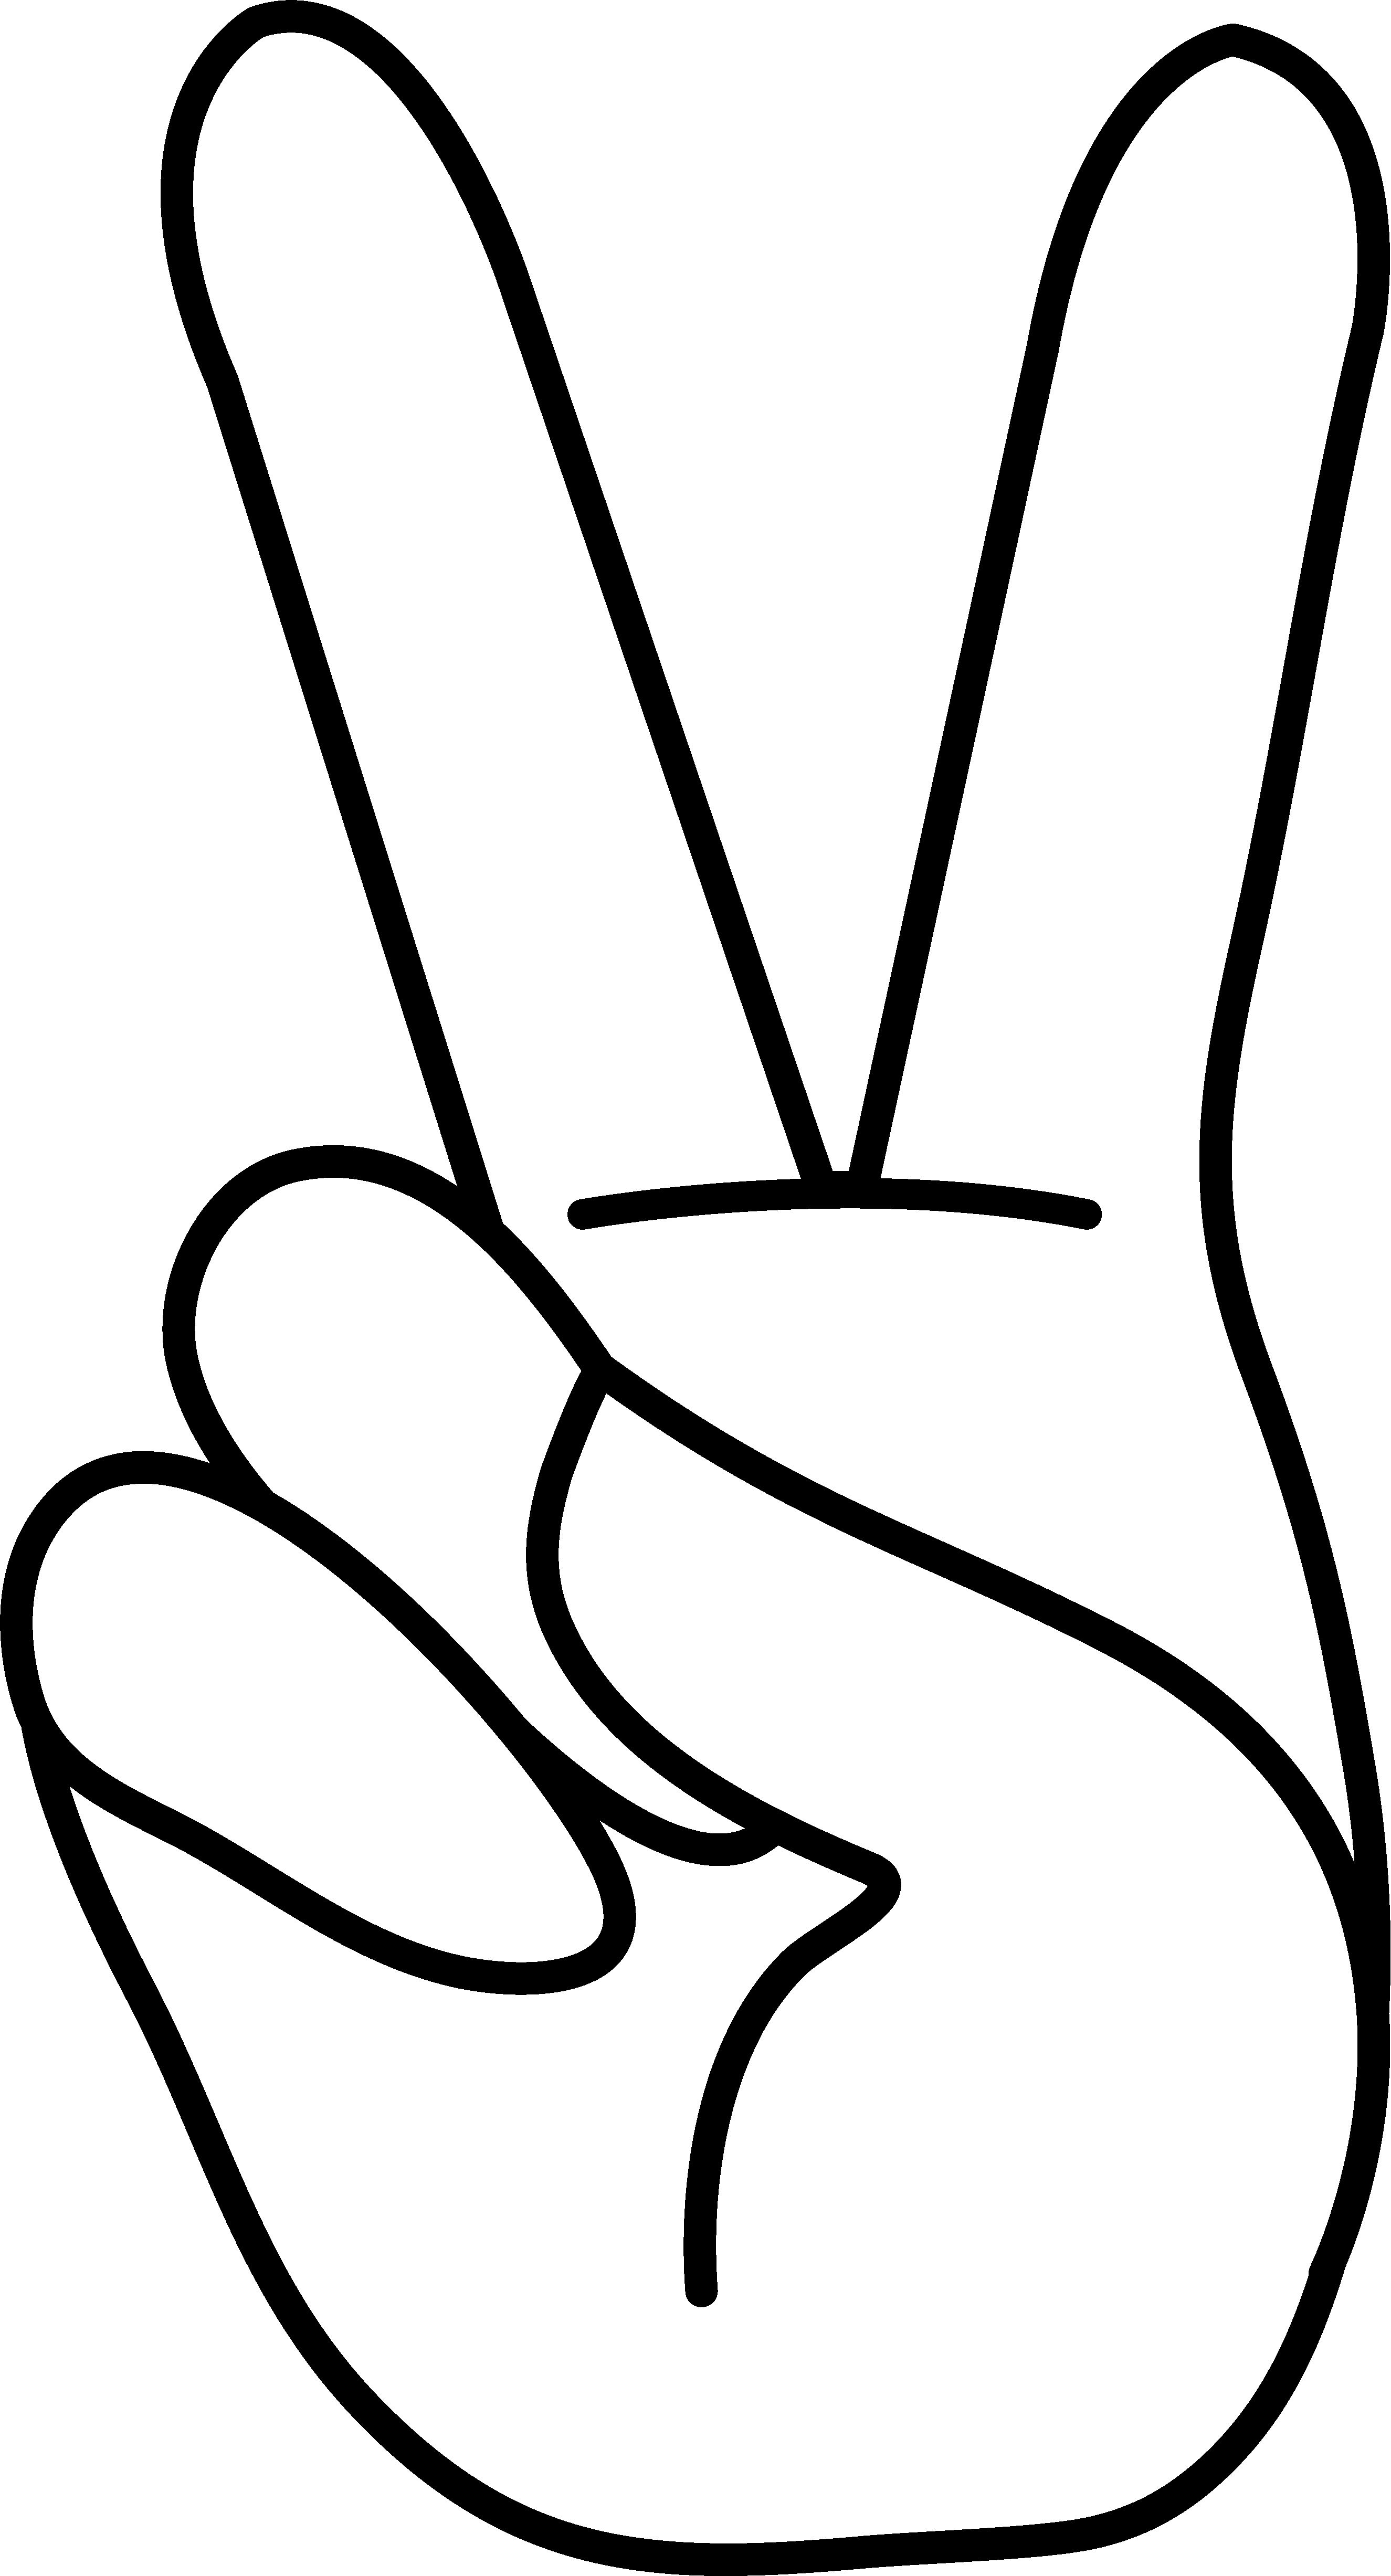 Peace Hand Sign Coloring Page - Free Clip Art